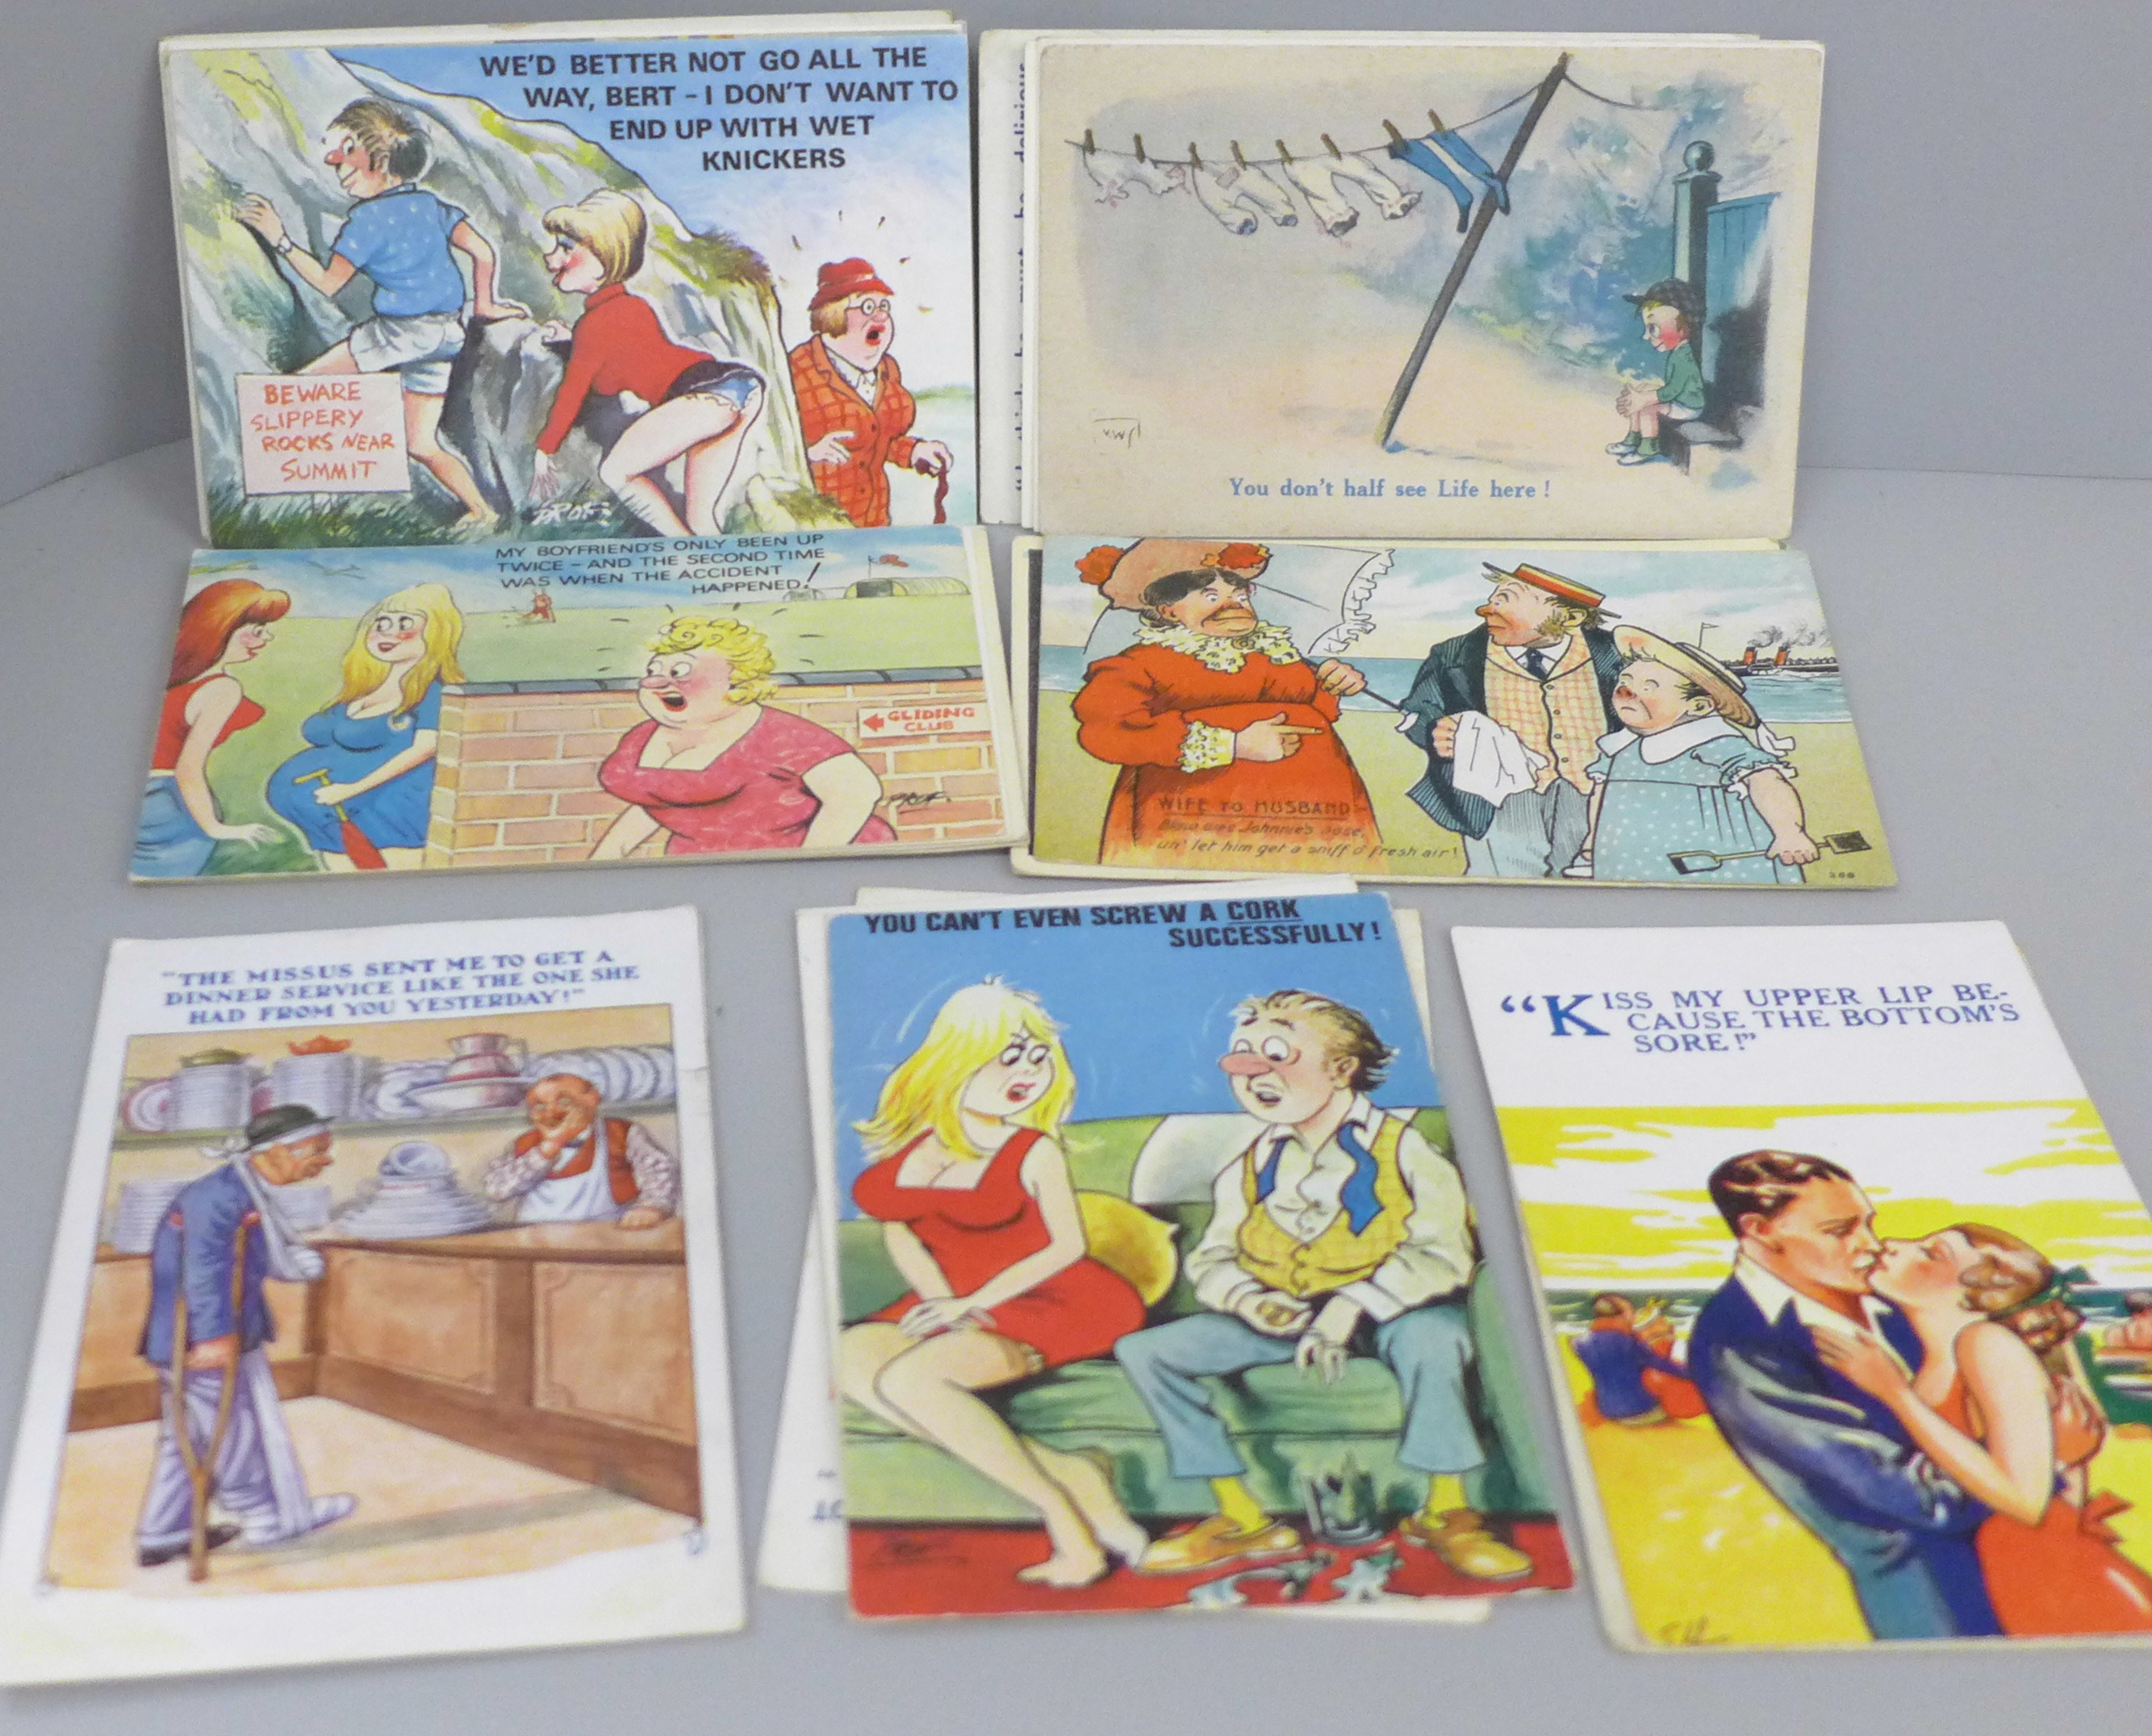 Postcards; a collection of comic postcards, vintage to modern